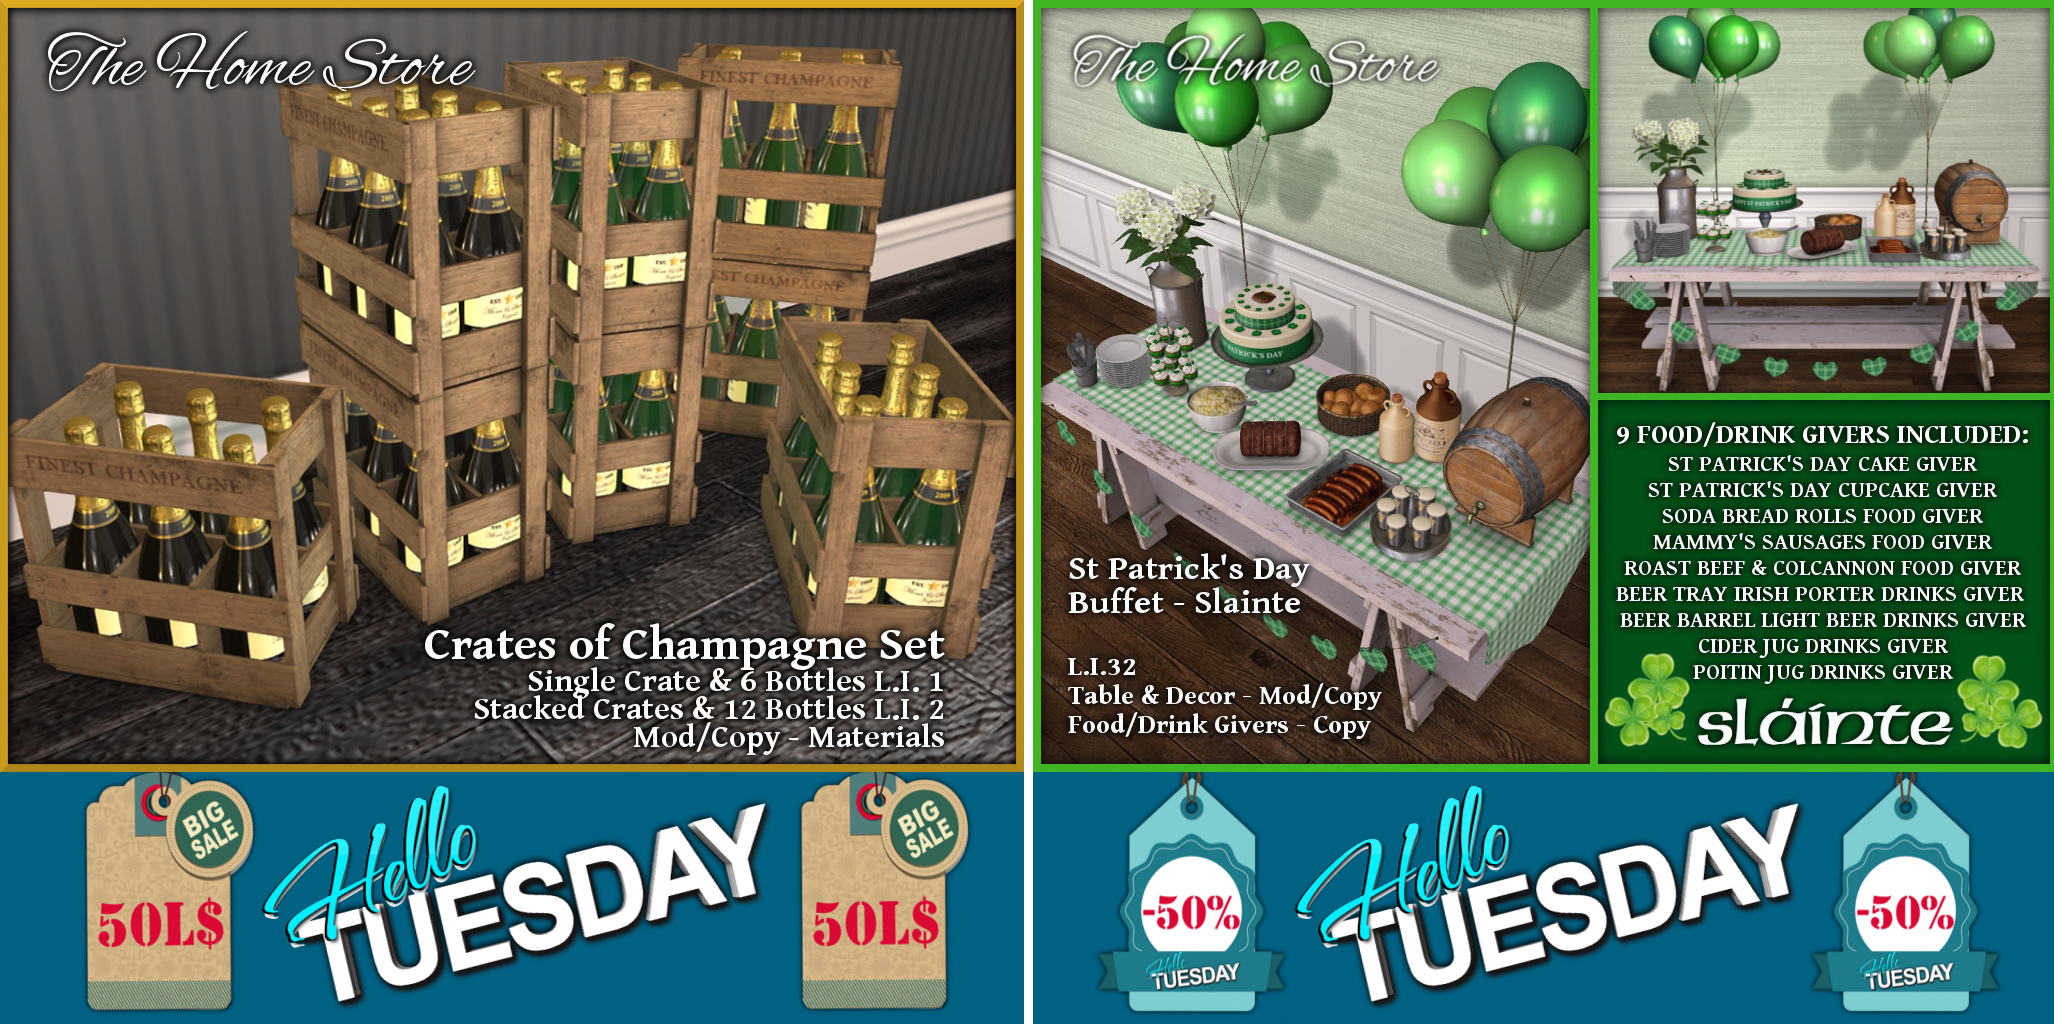 The Home Store – Crates of Champagne & St. Patrick’s Day Buffet